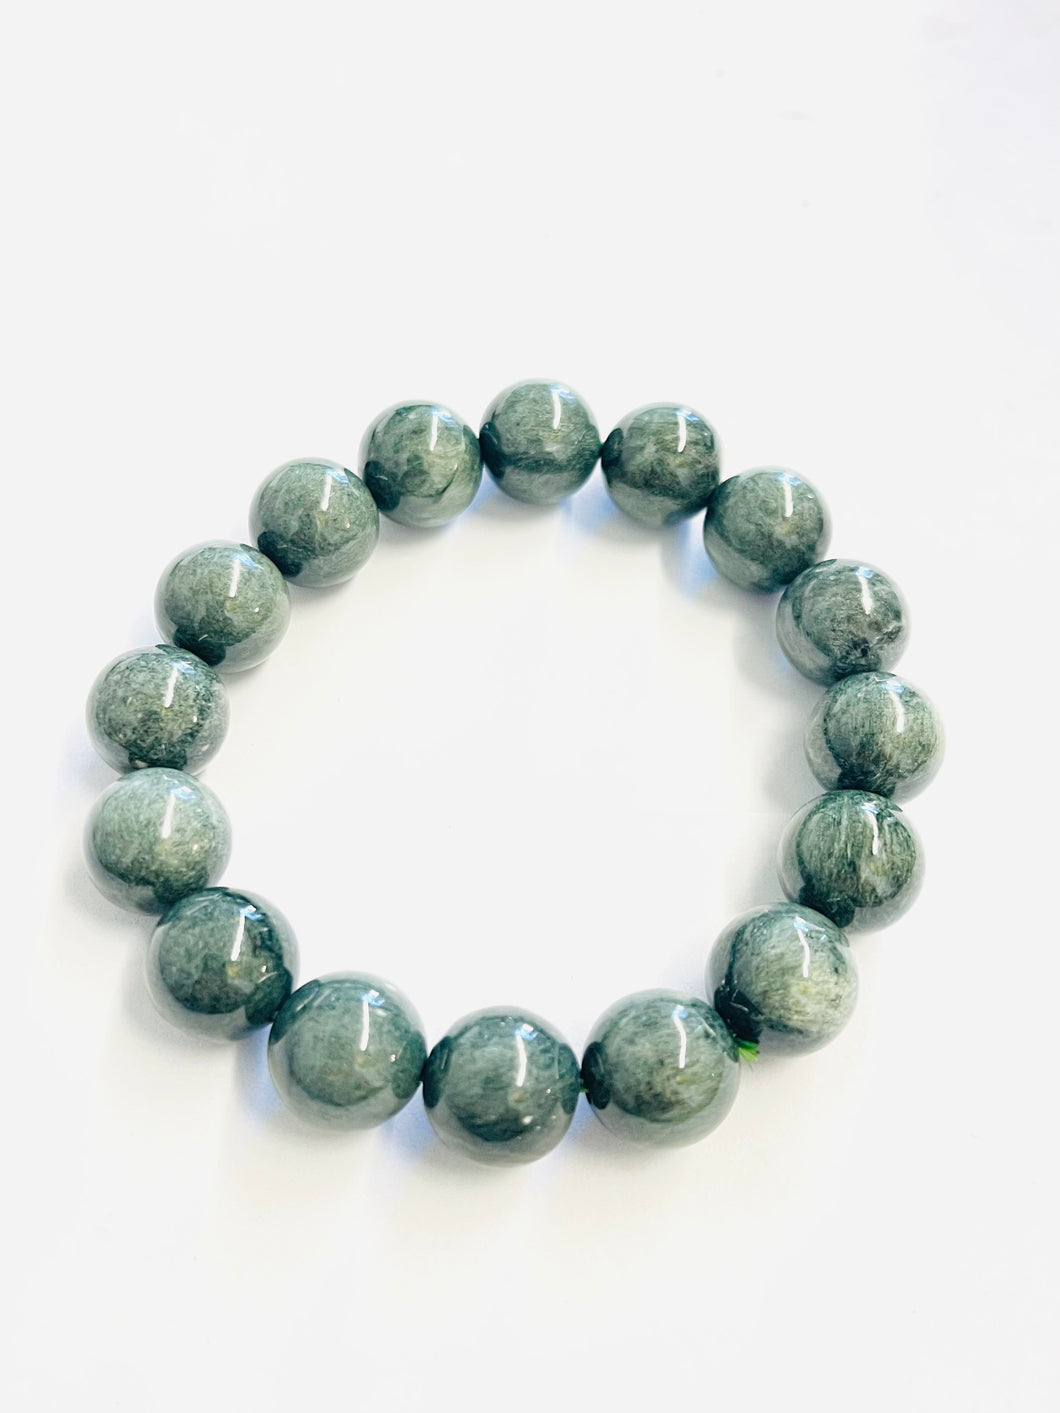 Bracelet with Russian Seraphinite